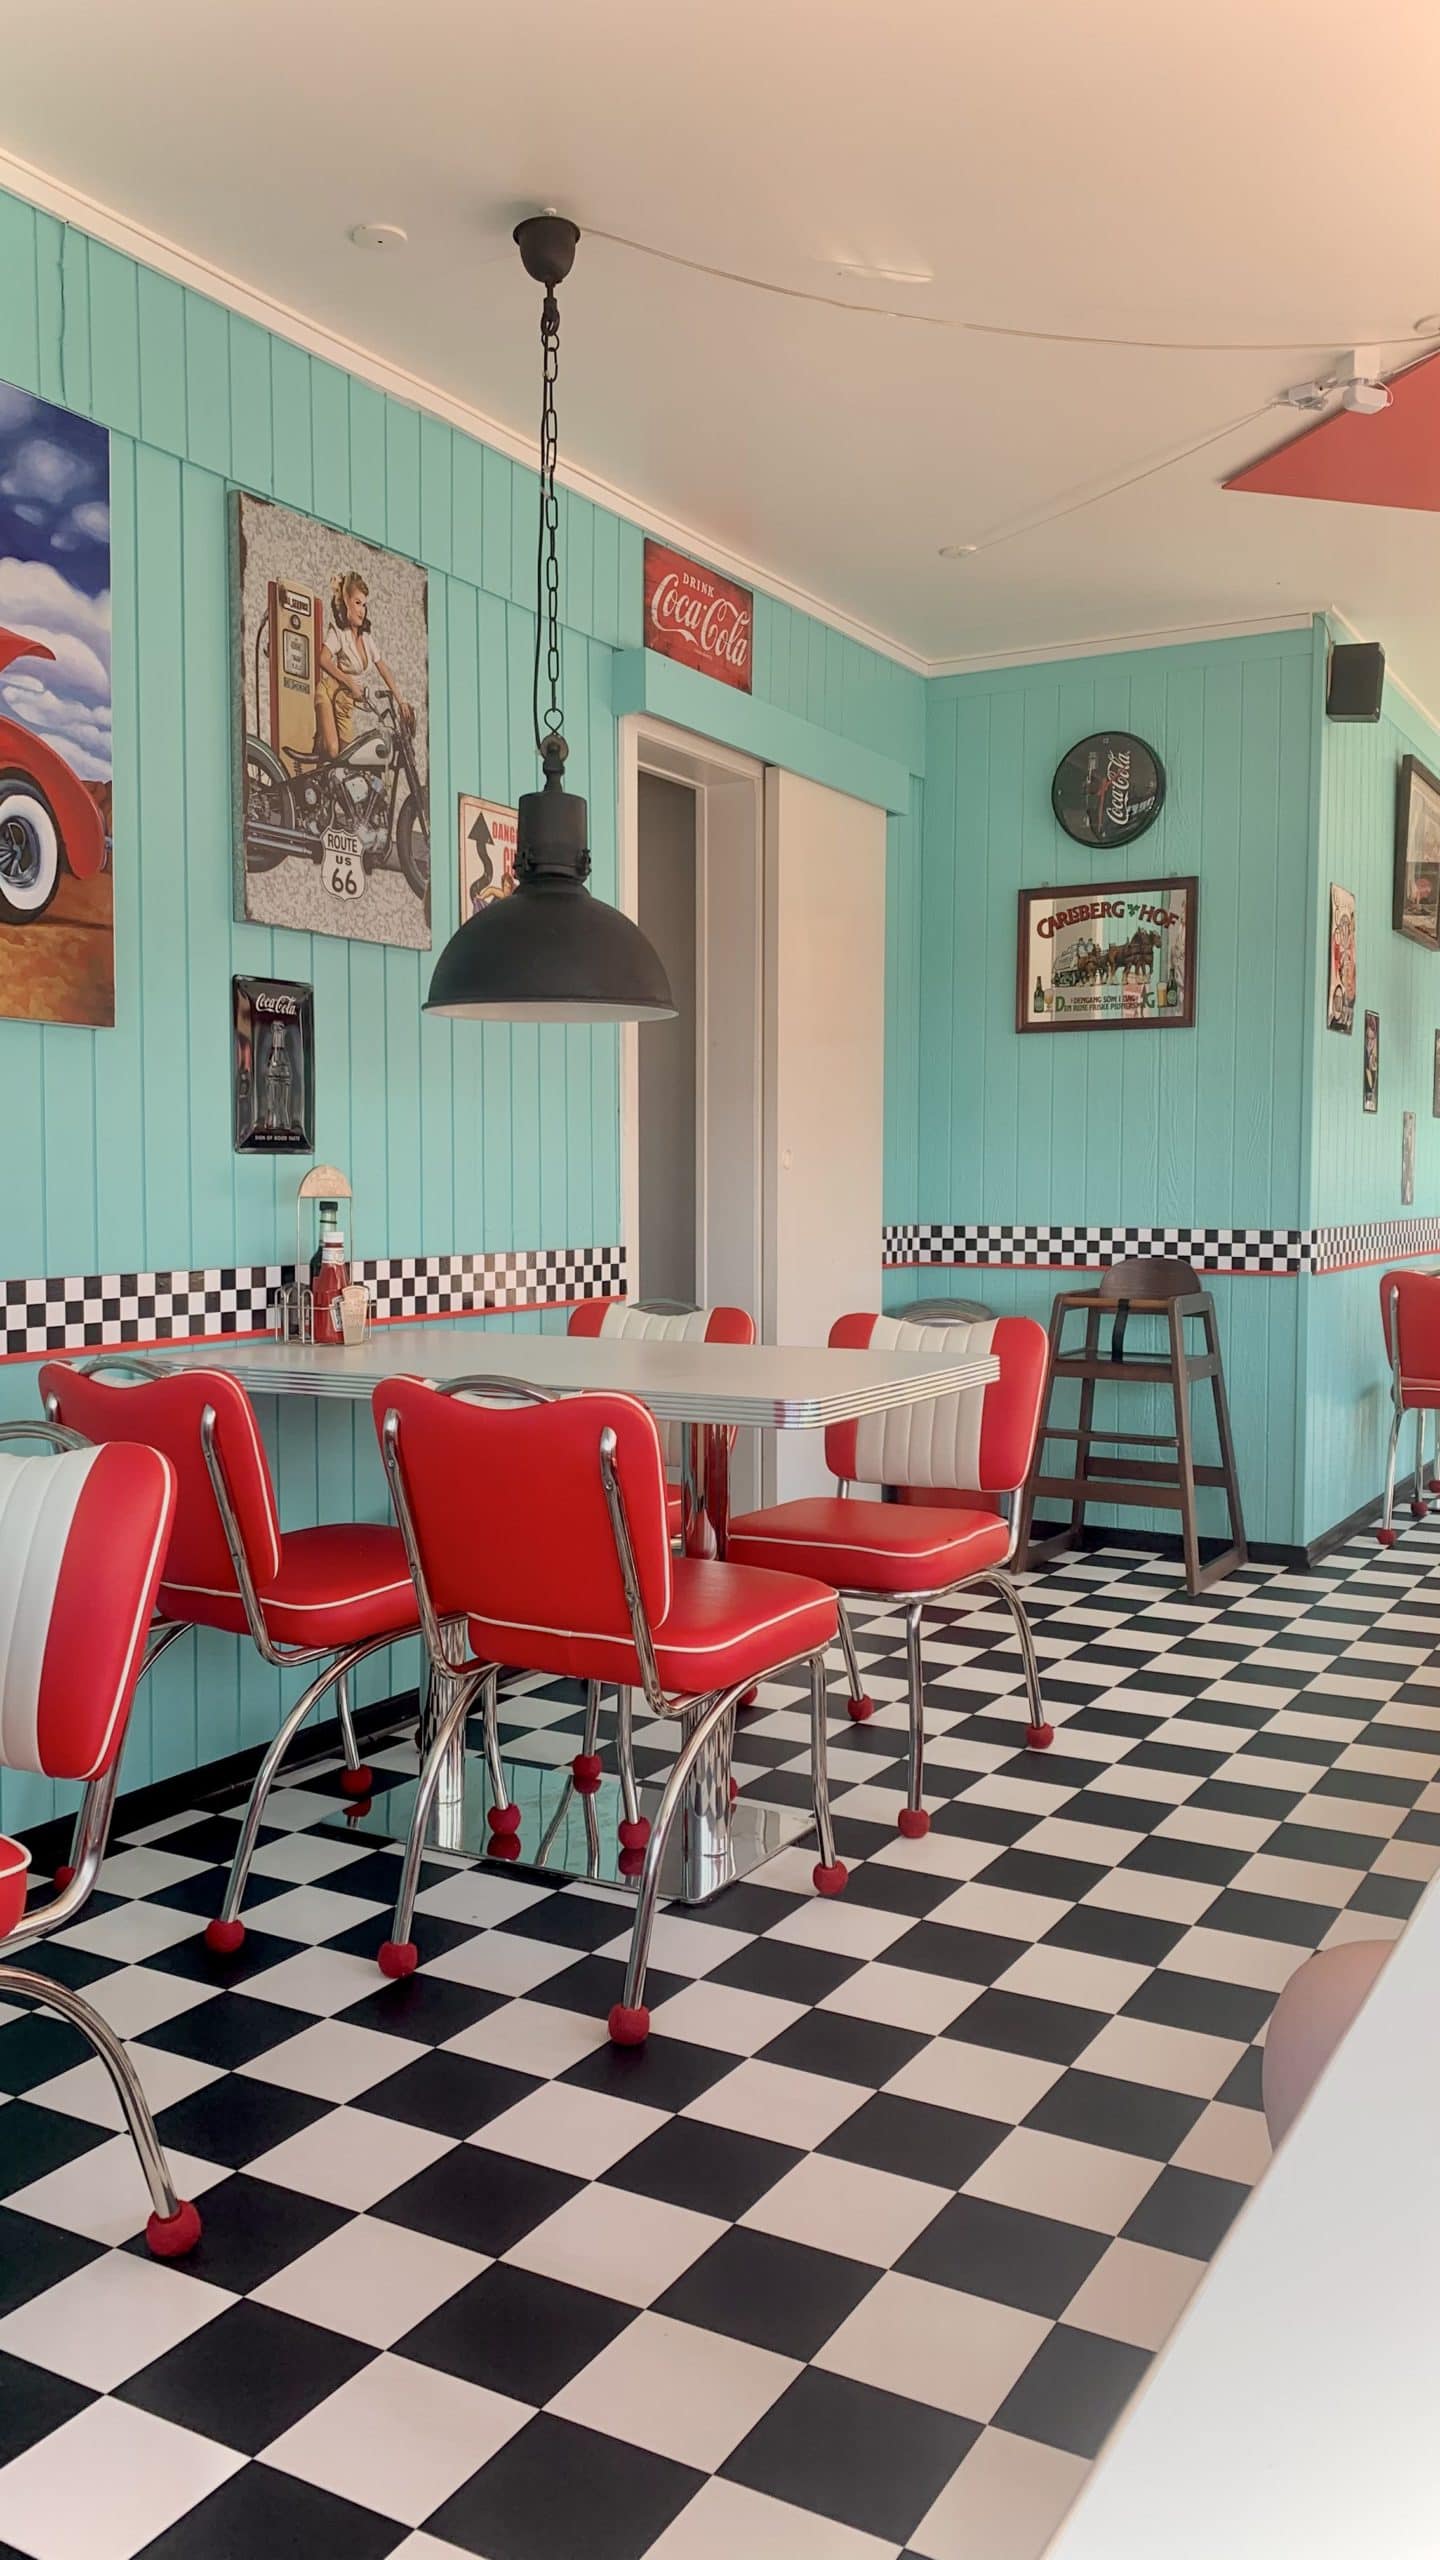 1950s diner with black and white floor tiles, red chairs, white tables, and blue wall